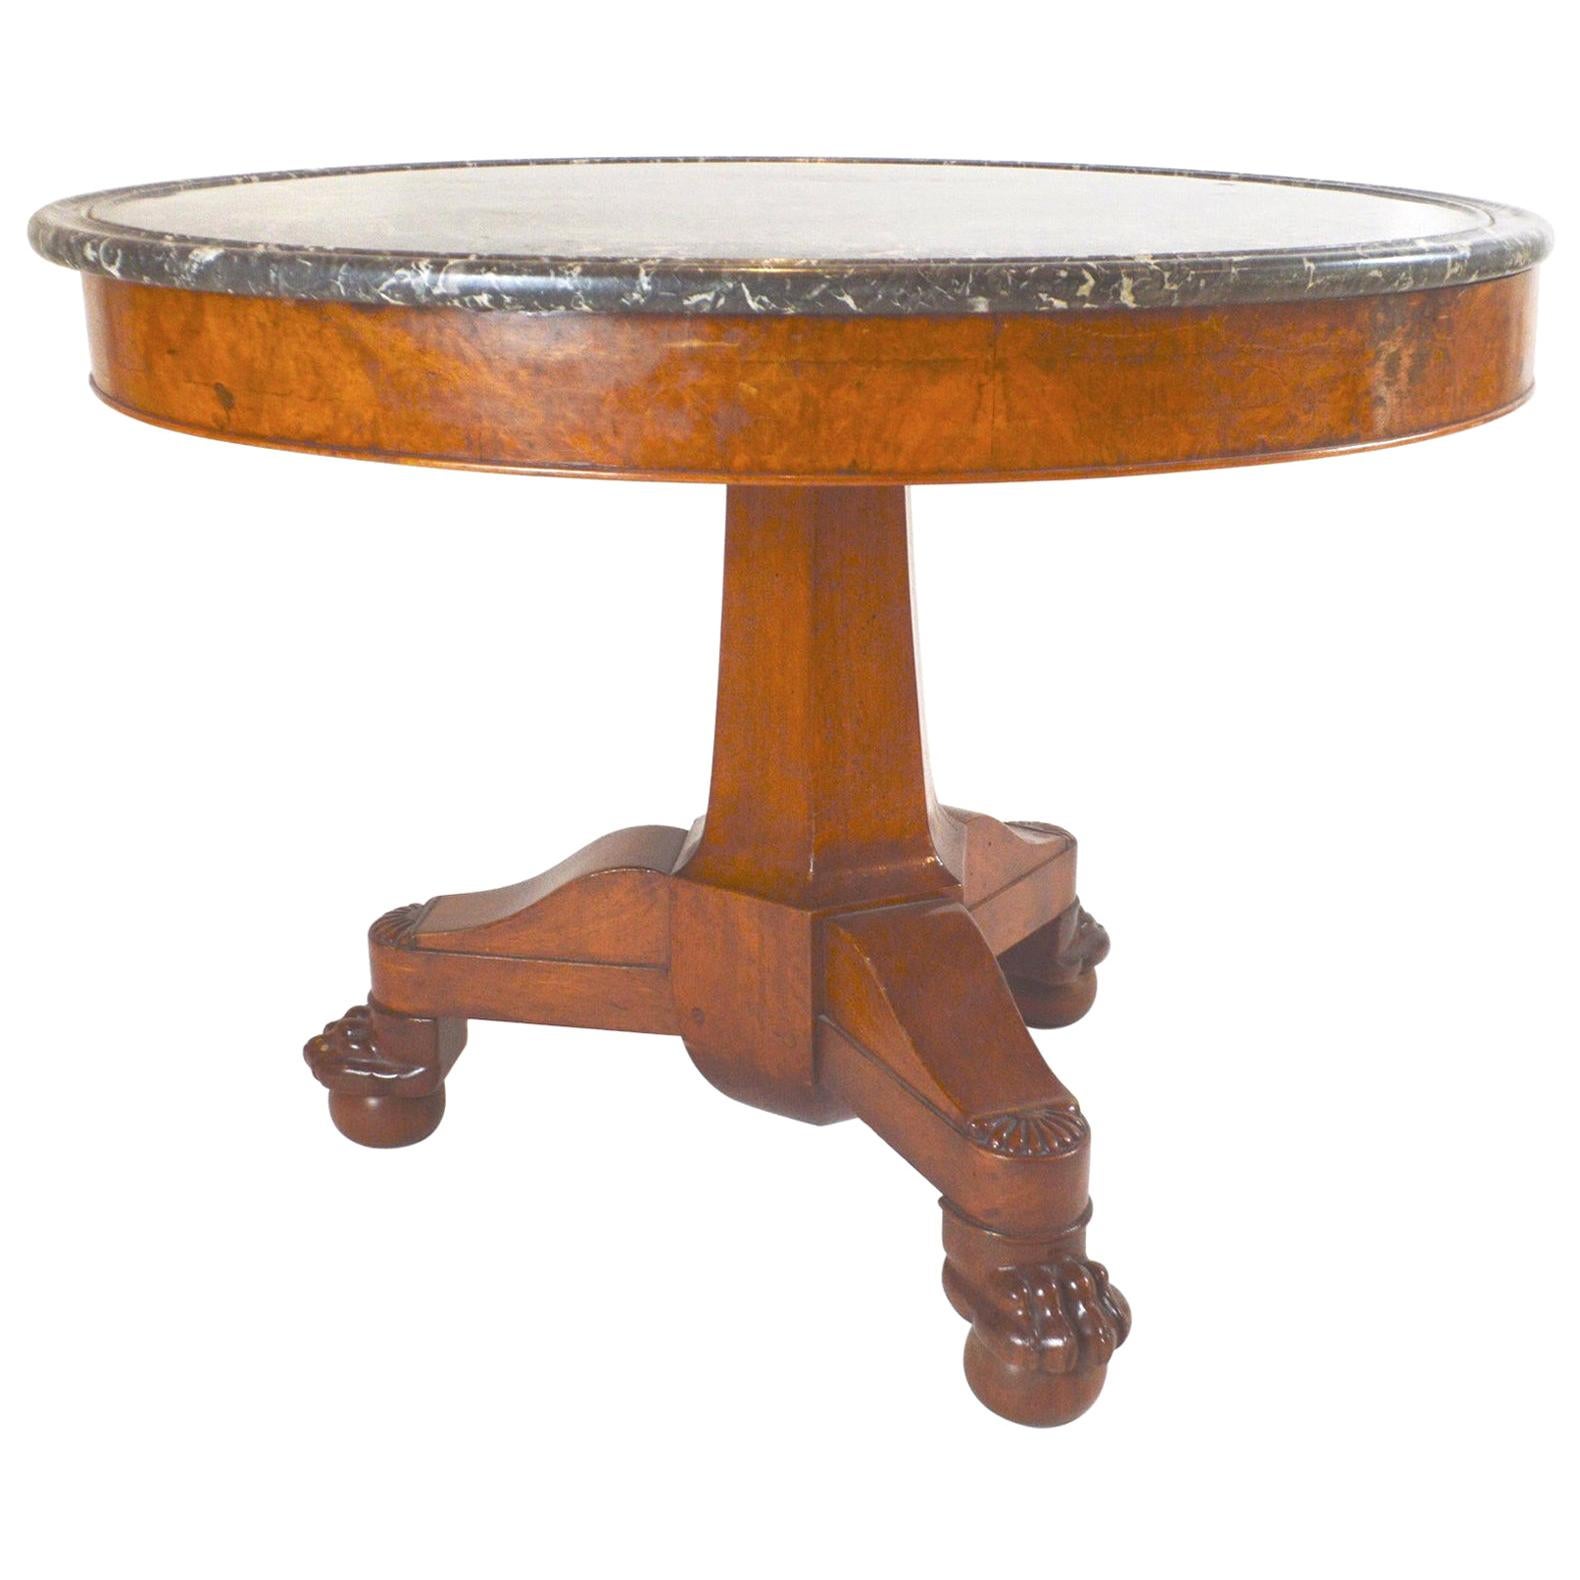 19th Century French Empire Walnut Center Table with Marble Top